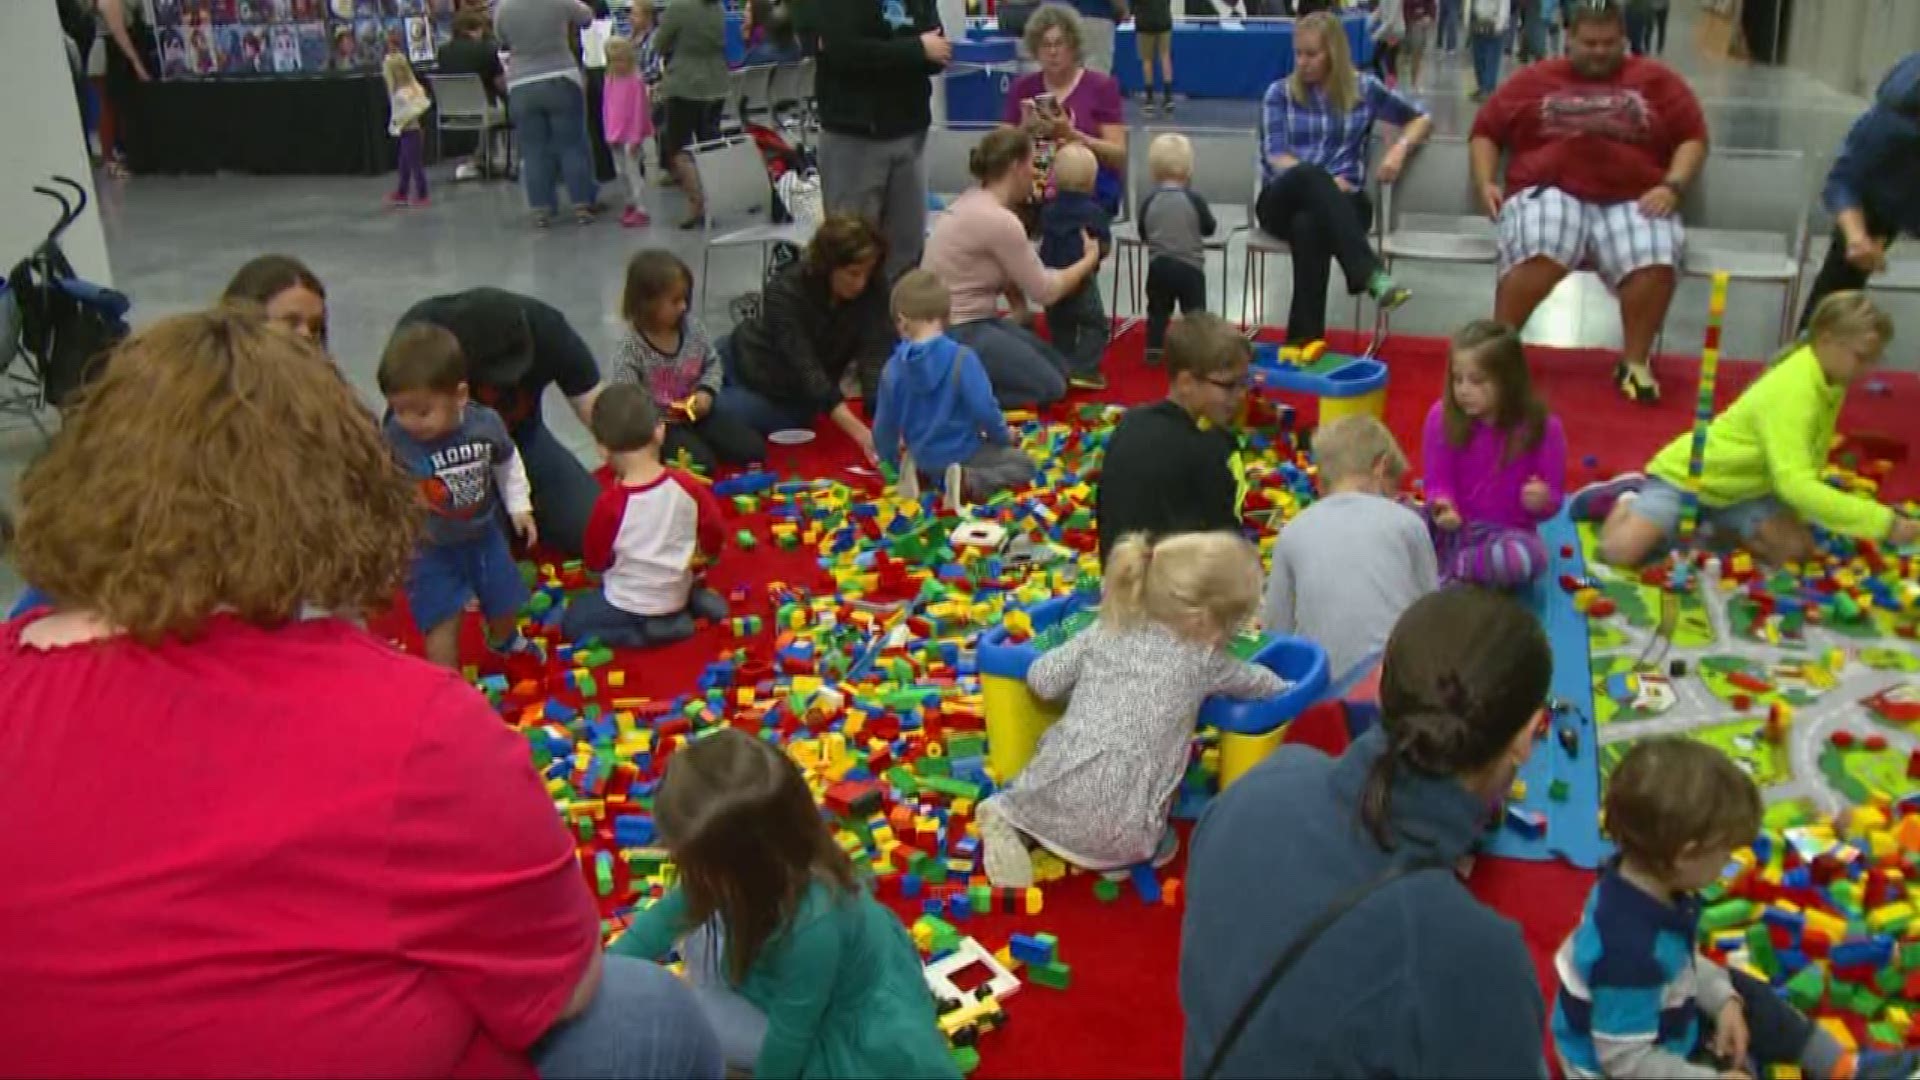 LEGO convention comes to Cleveland